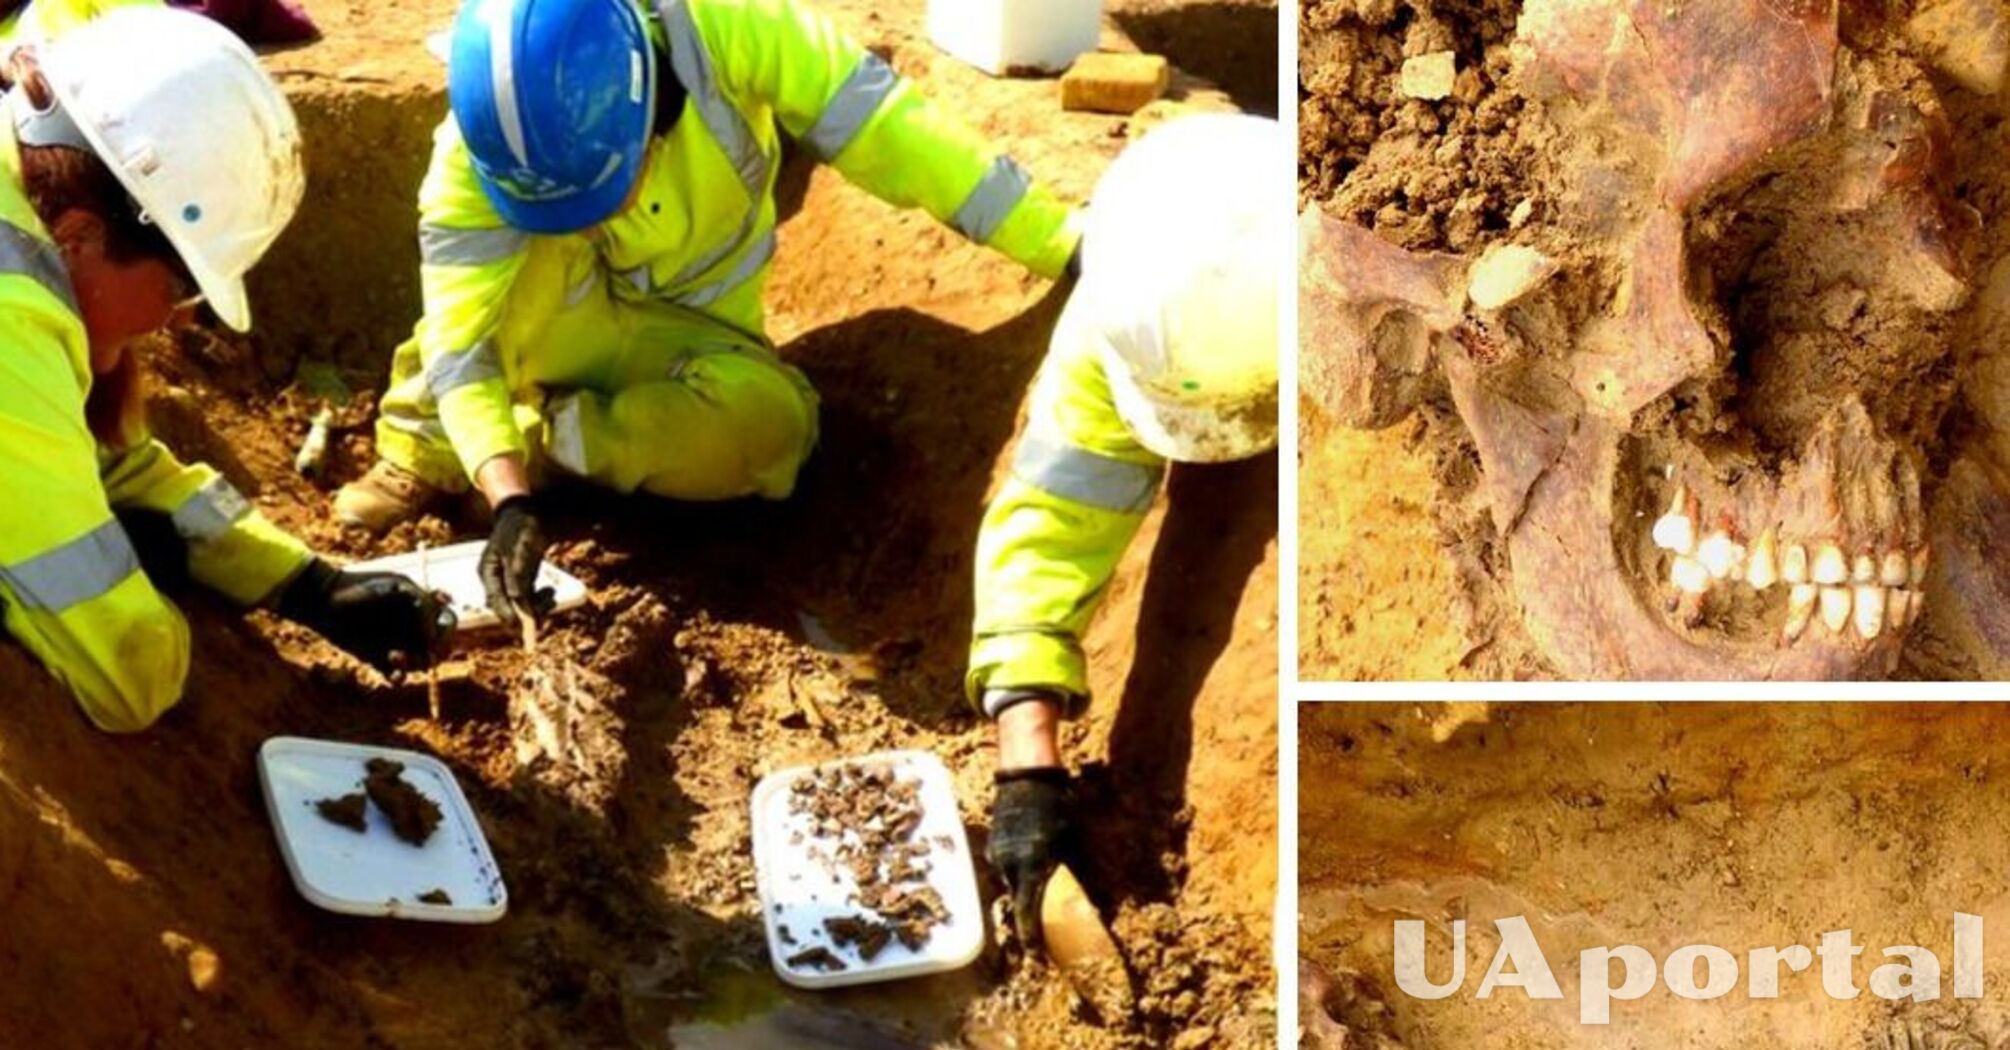 Origin of 2000-year-old body in Britain solved: the deceased was from Ukraine (photo)